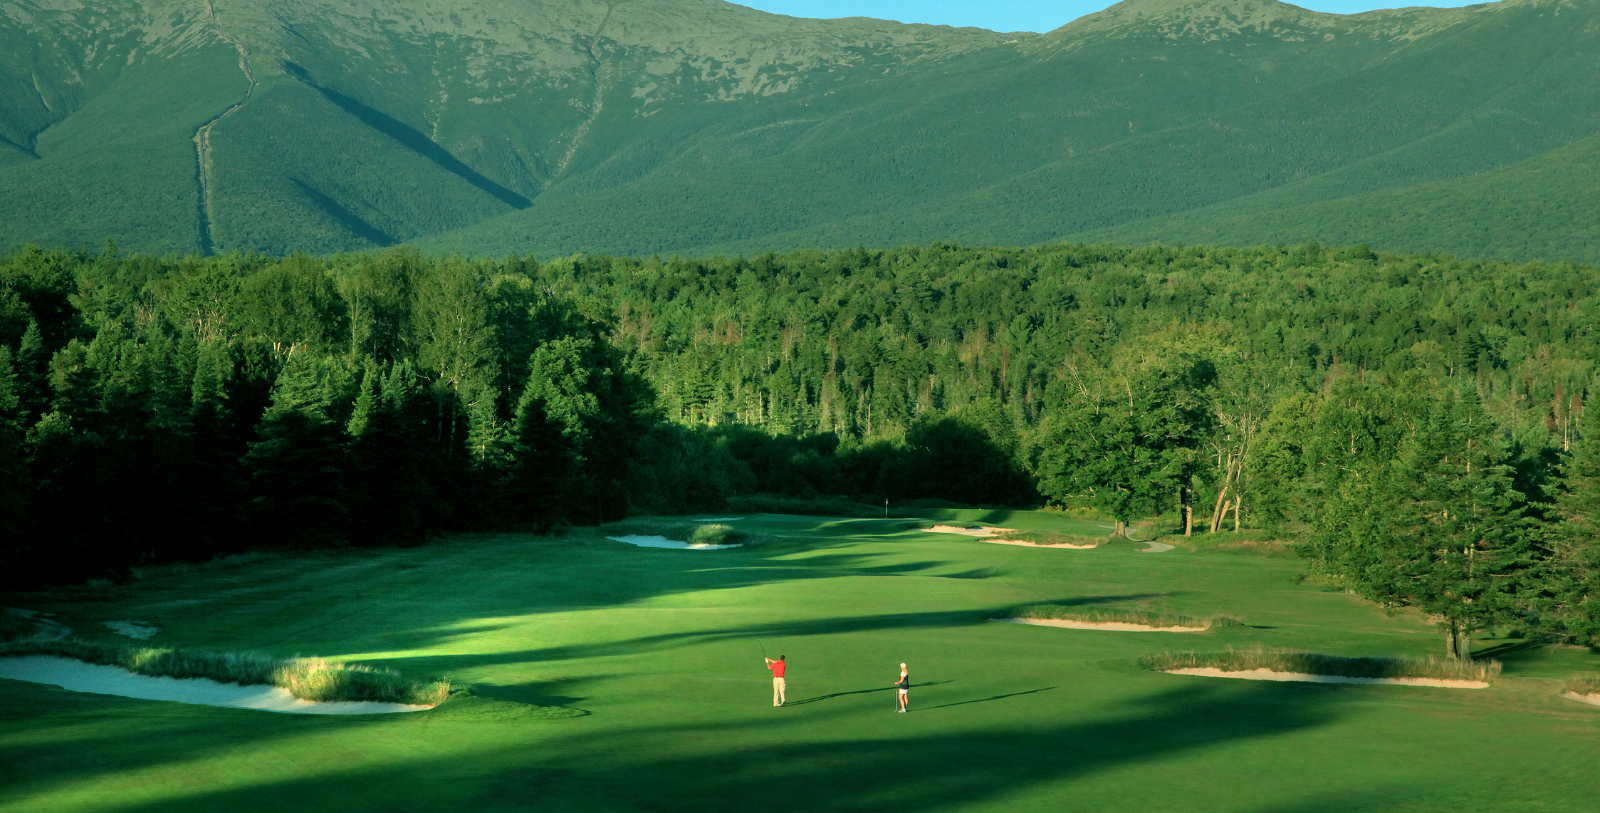 Image of Mount Washington Course, Omni Bretton Arms Inn, 1896, Member of Historic Hotels of America, in Bretton Woods, New Hampshire, Golf.